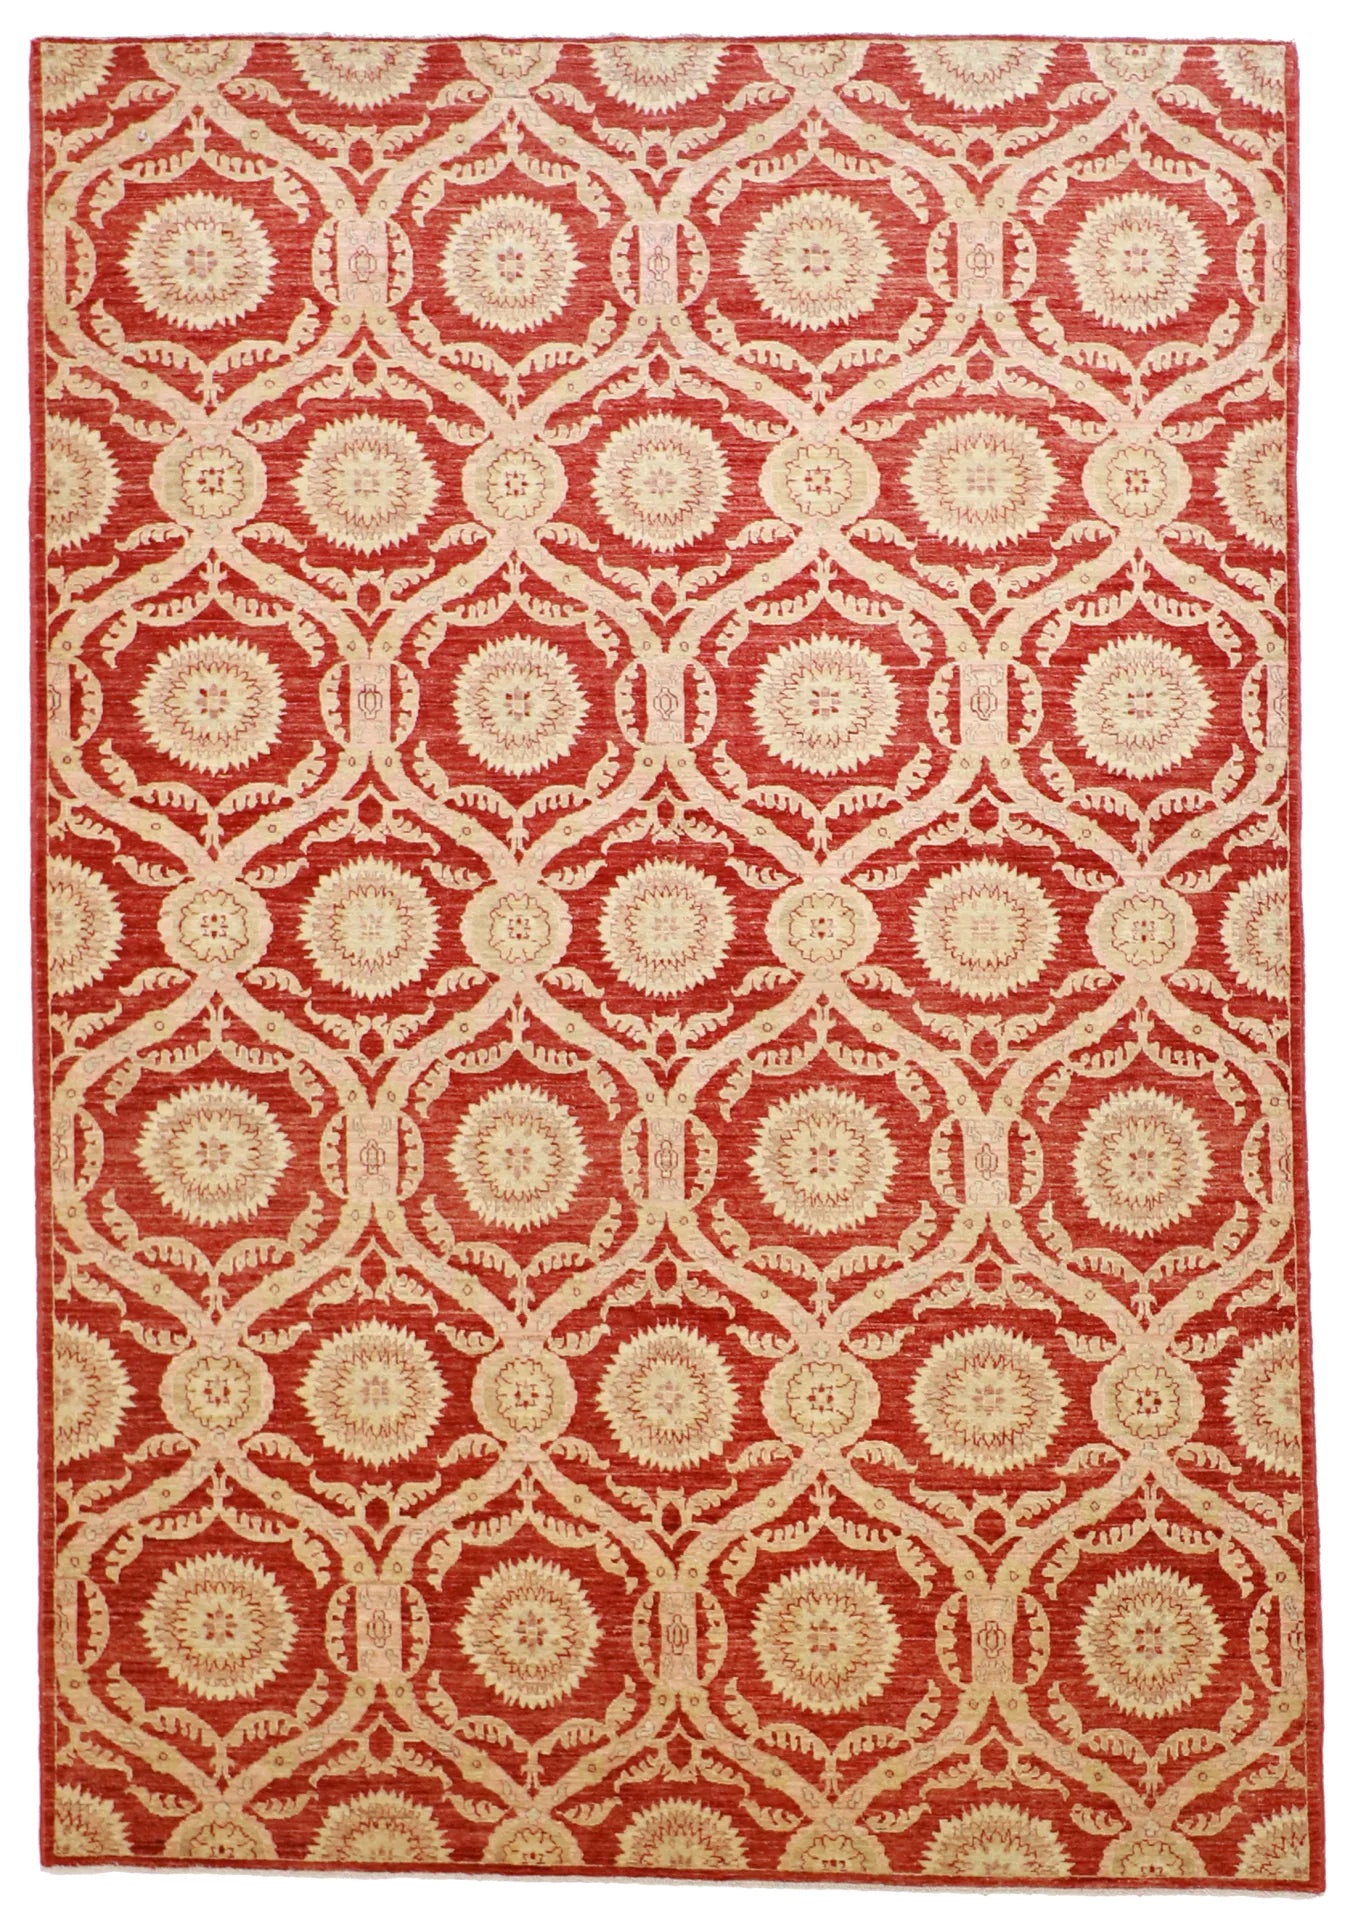 6x9 - Sultan Abad Fine All Over Rectangle - Hand Knotted Rug